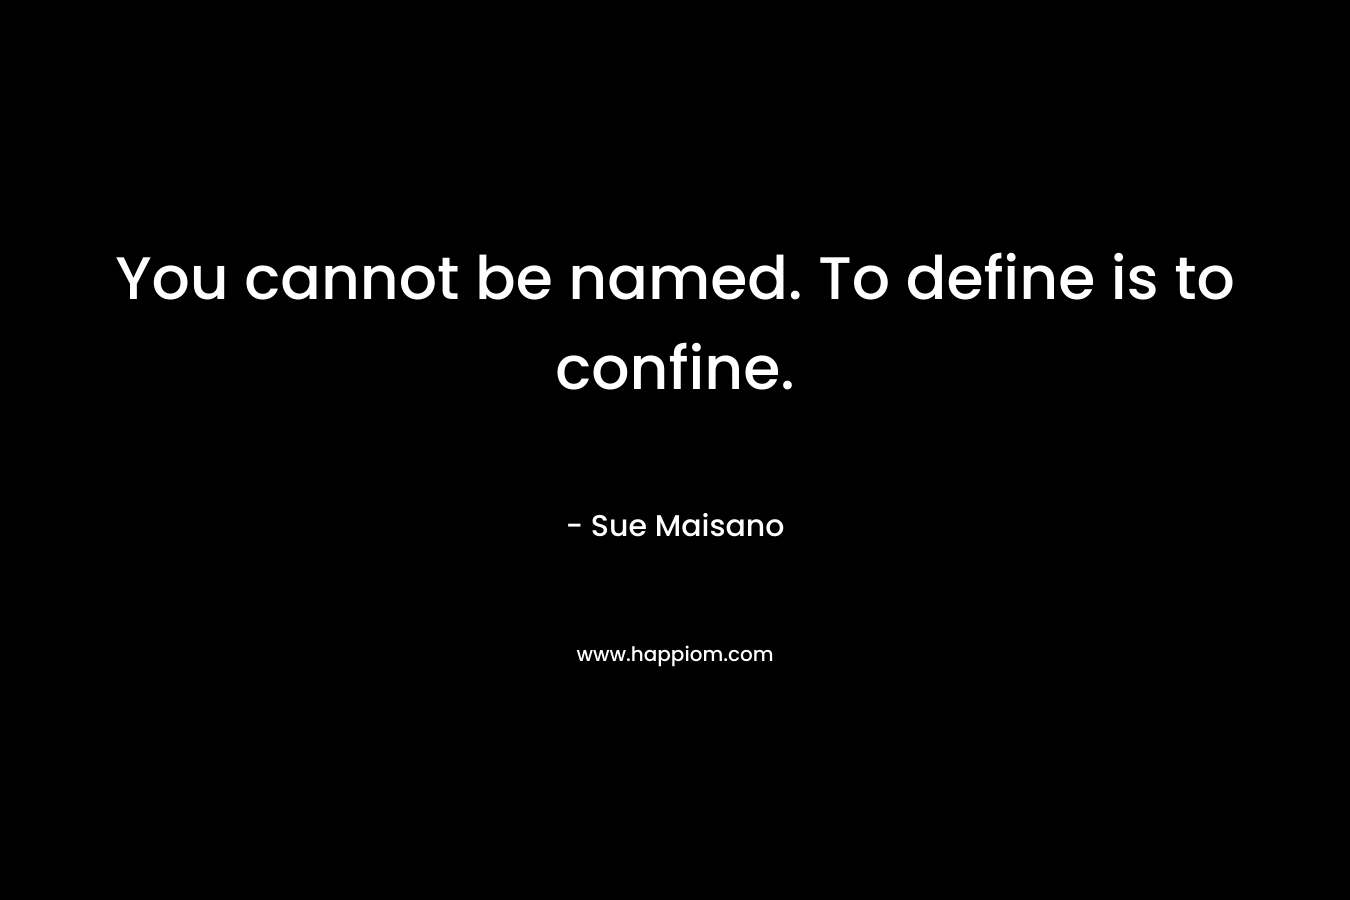 You cannot be named. To define is to confine.